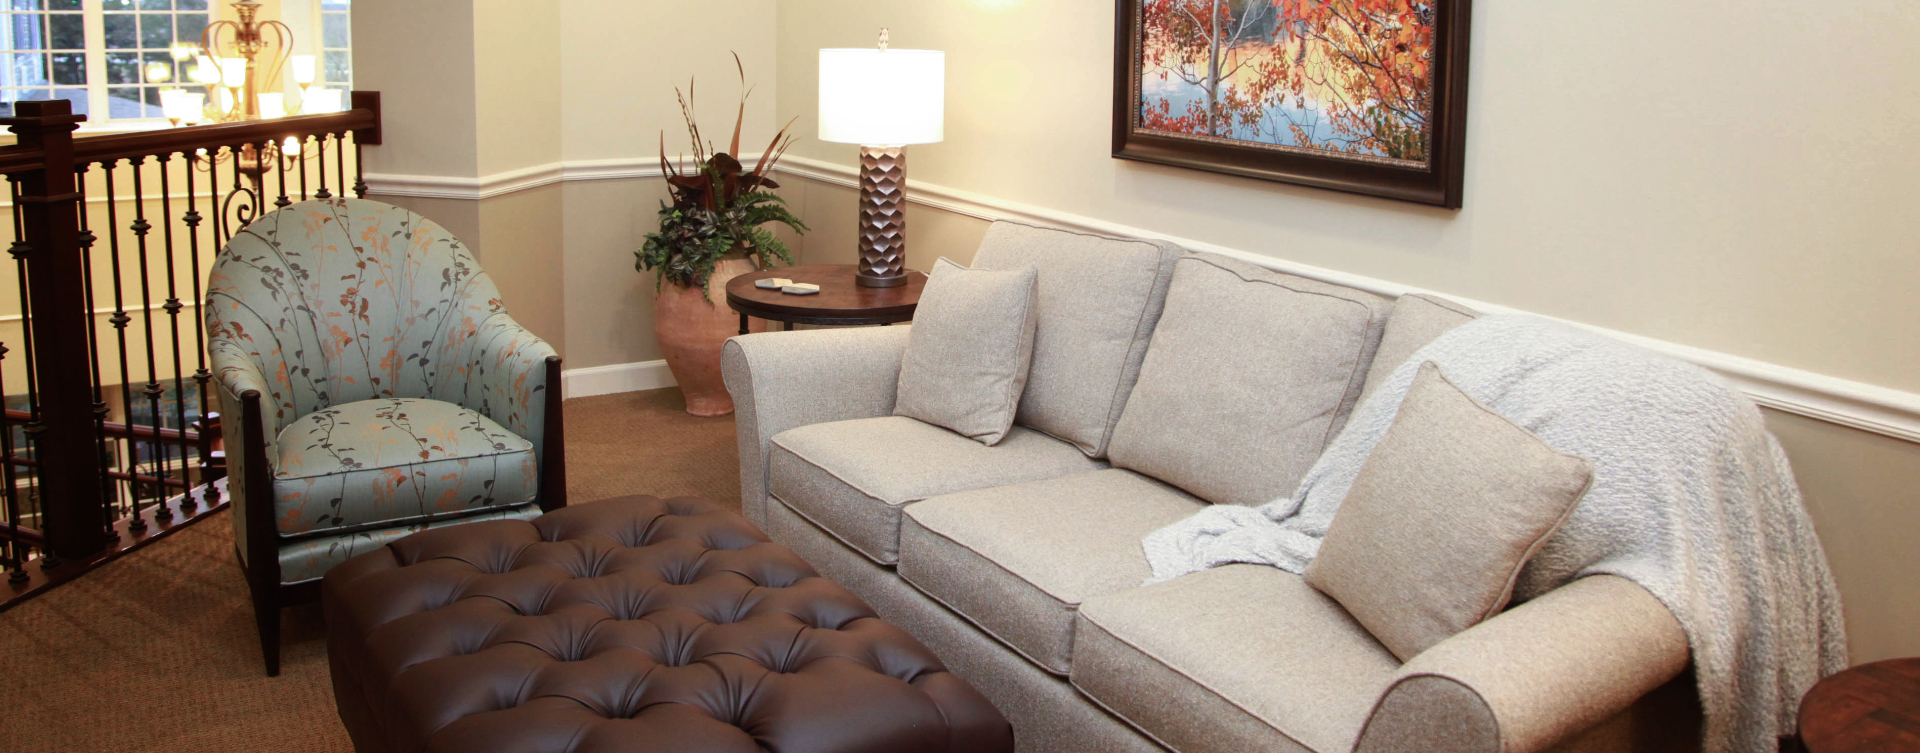 Enjoy a good snooze in the sitting area at Bickford of St. Charles